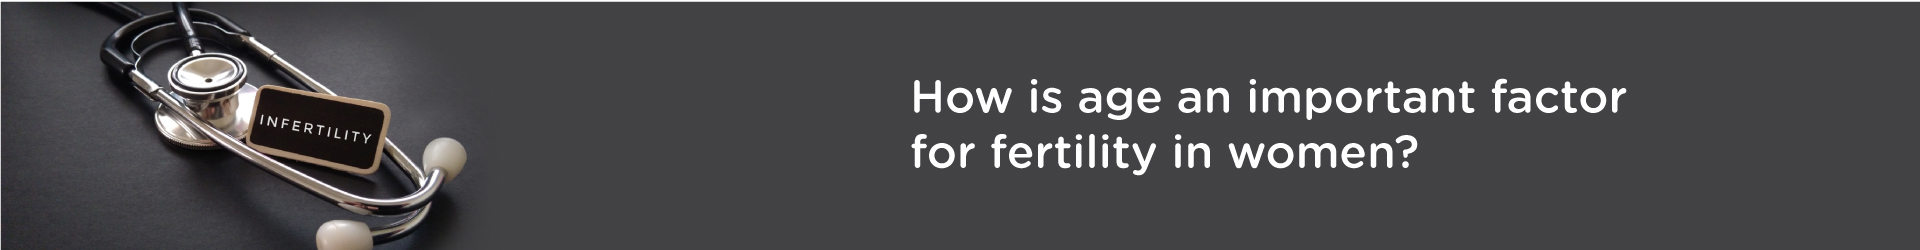 How is Age an Important Factor for Fertility in Women?